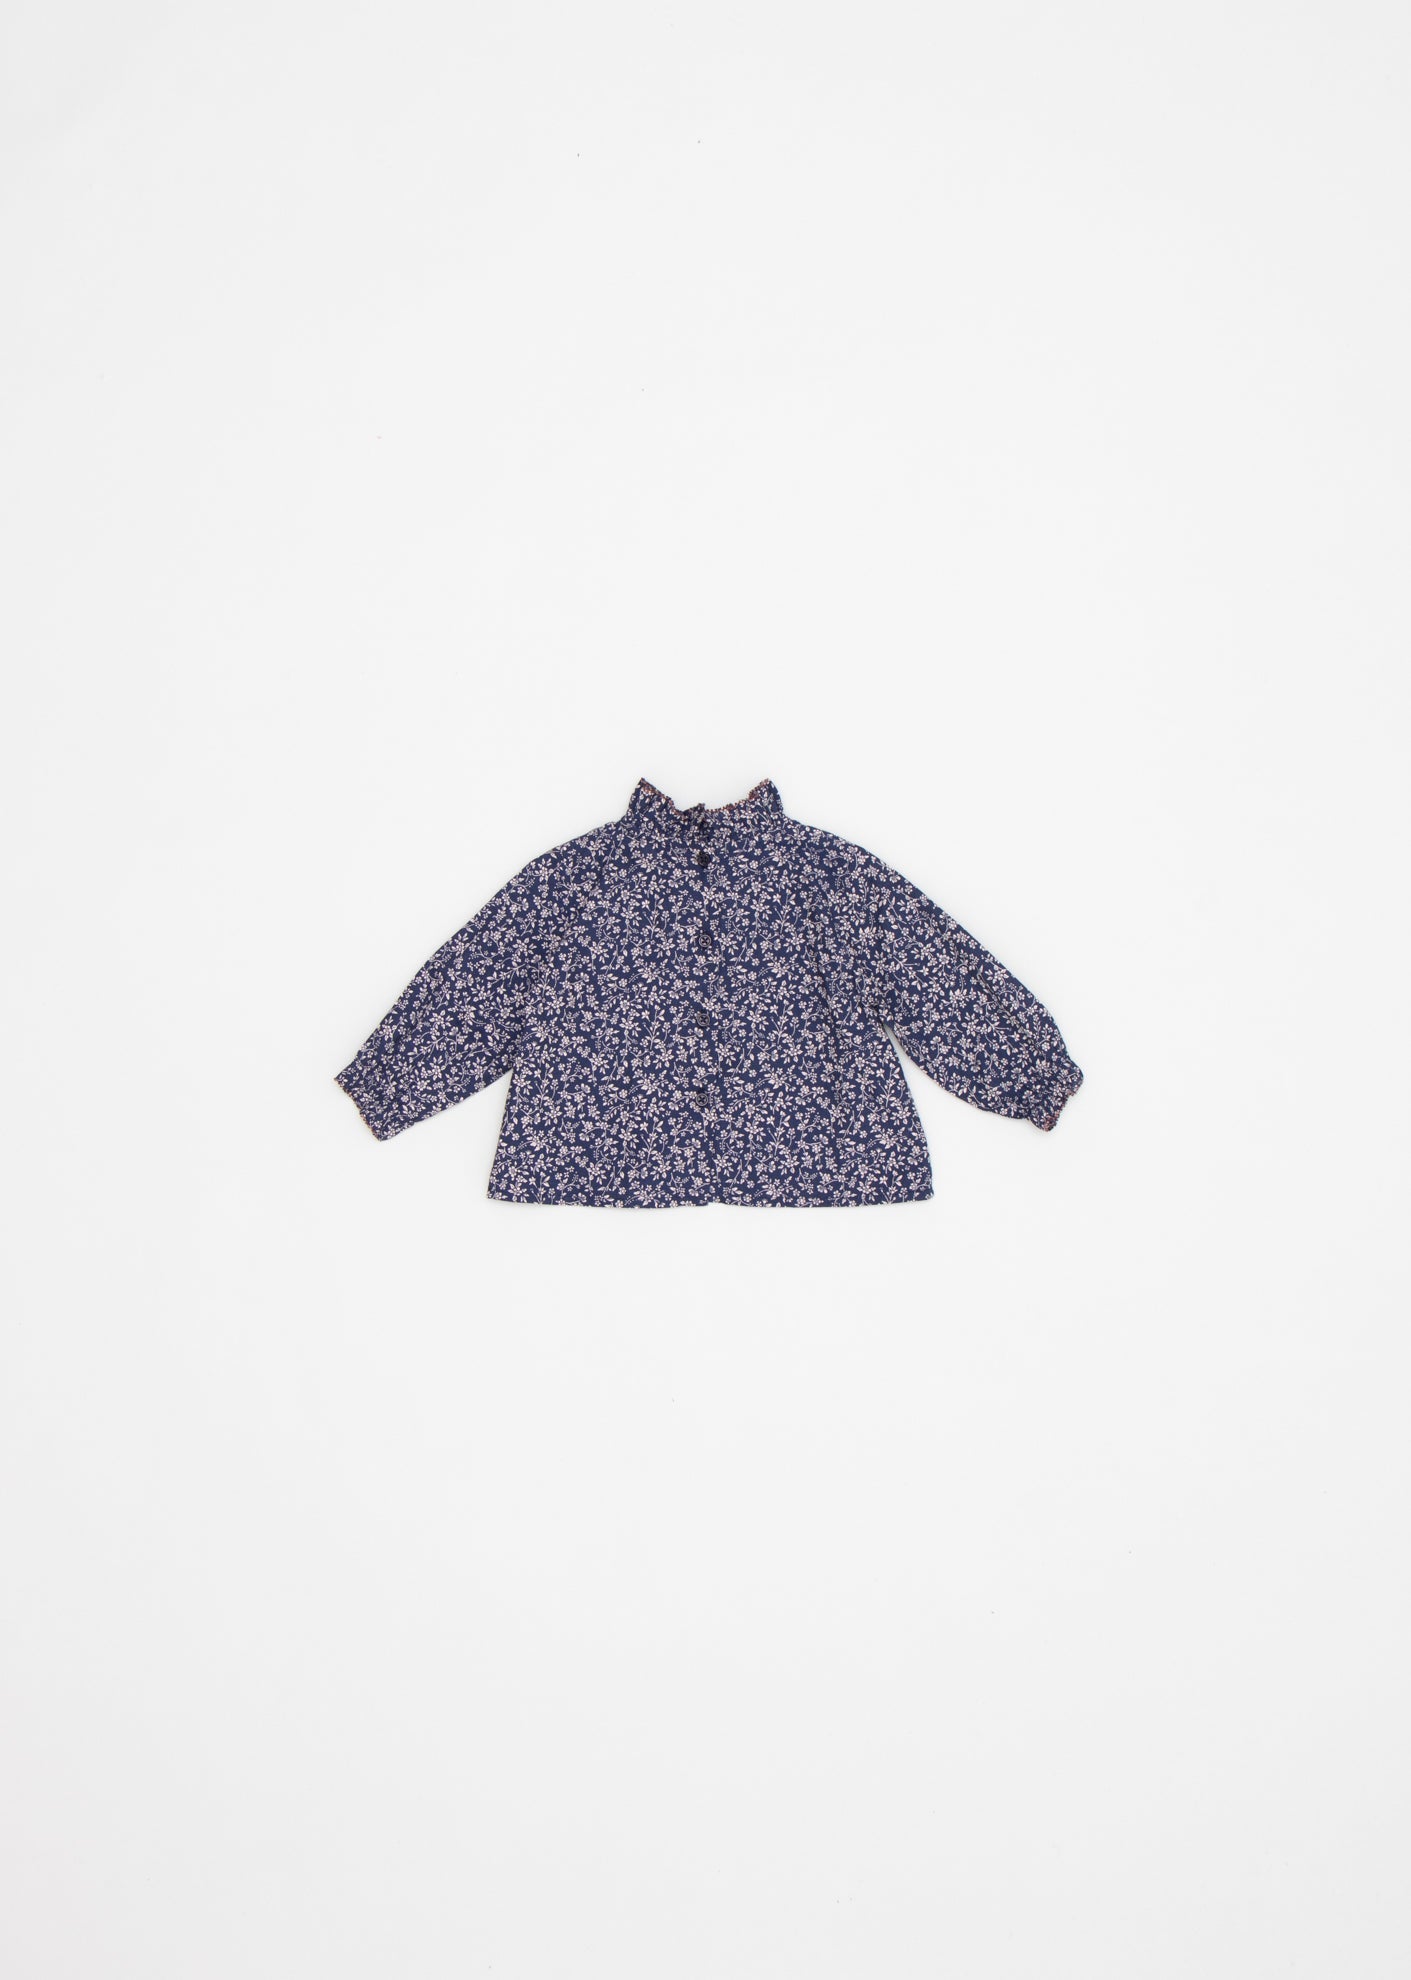 AMICIA BABY BLOUSE - NAVY FLORAL 2